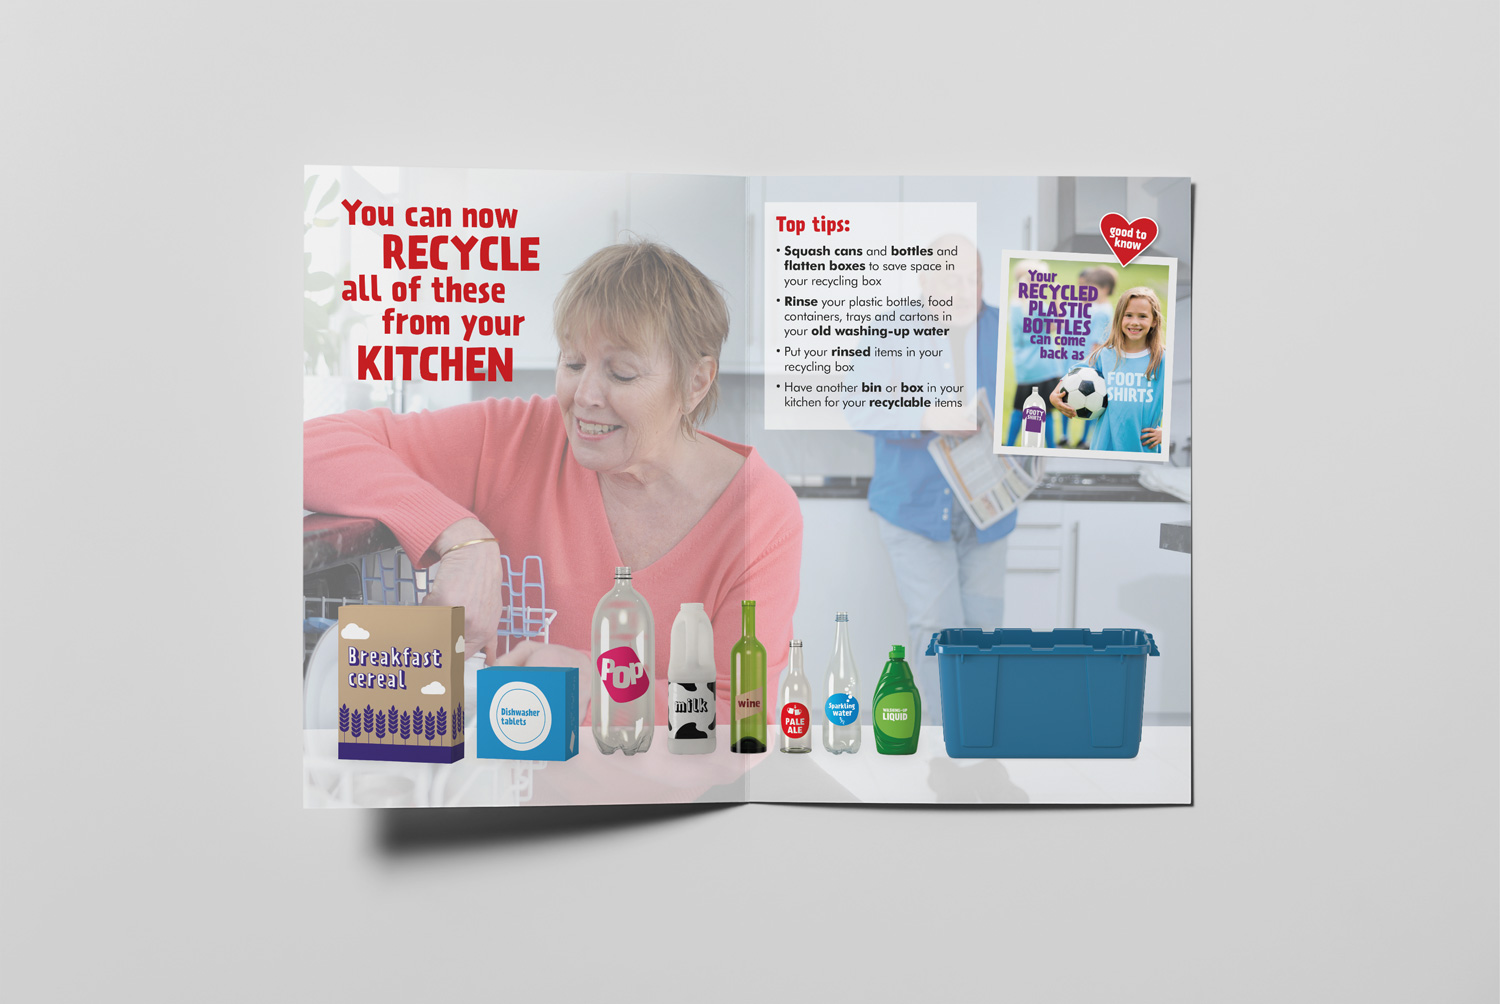 Recycle-for-London-Recycling-Leaflet-inside-spread-by-Get-it-Sorted.jpg